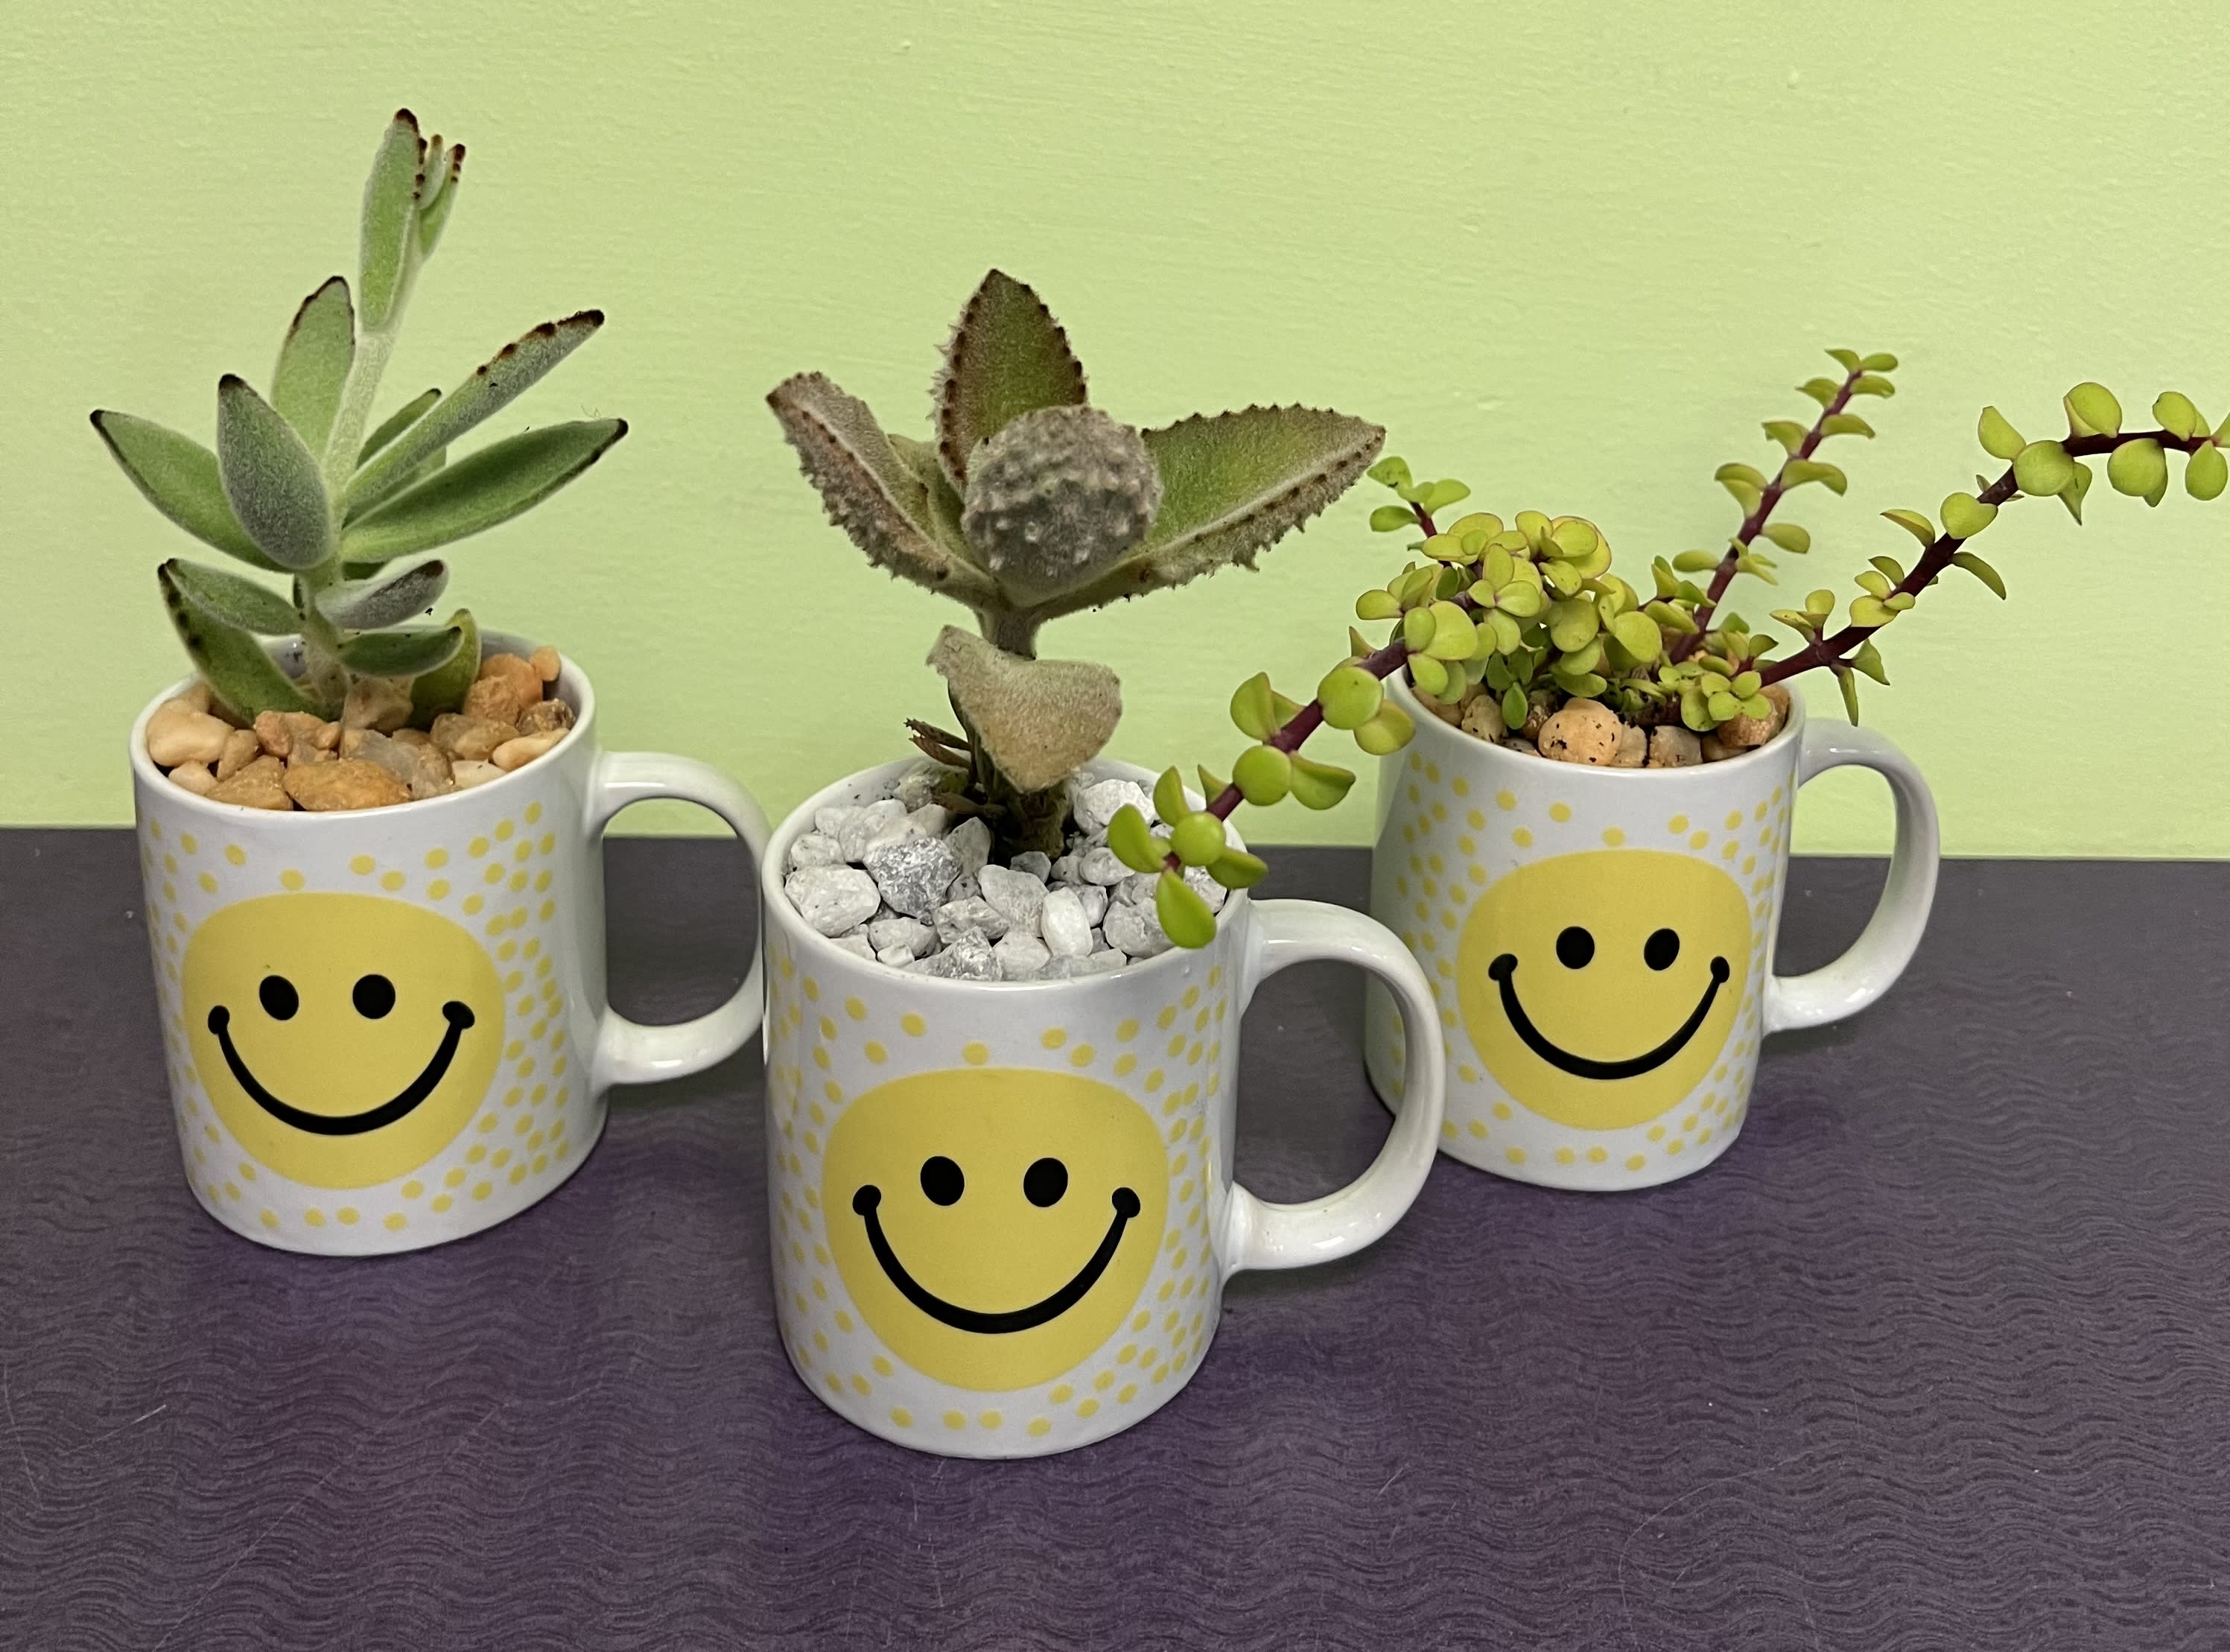 Happy Succulent Planter (One Plant) - With this design you will receive one beautiful succulent that one of our professional and creative designers will pick from our local greenhouse. We will plant it and add some decorations to it as well. If you accidentally kill your succulent, that is ok too because you can always use the mug to enjoy a cup of coffee, tea, or even hot cocoa!